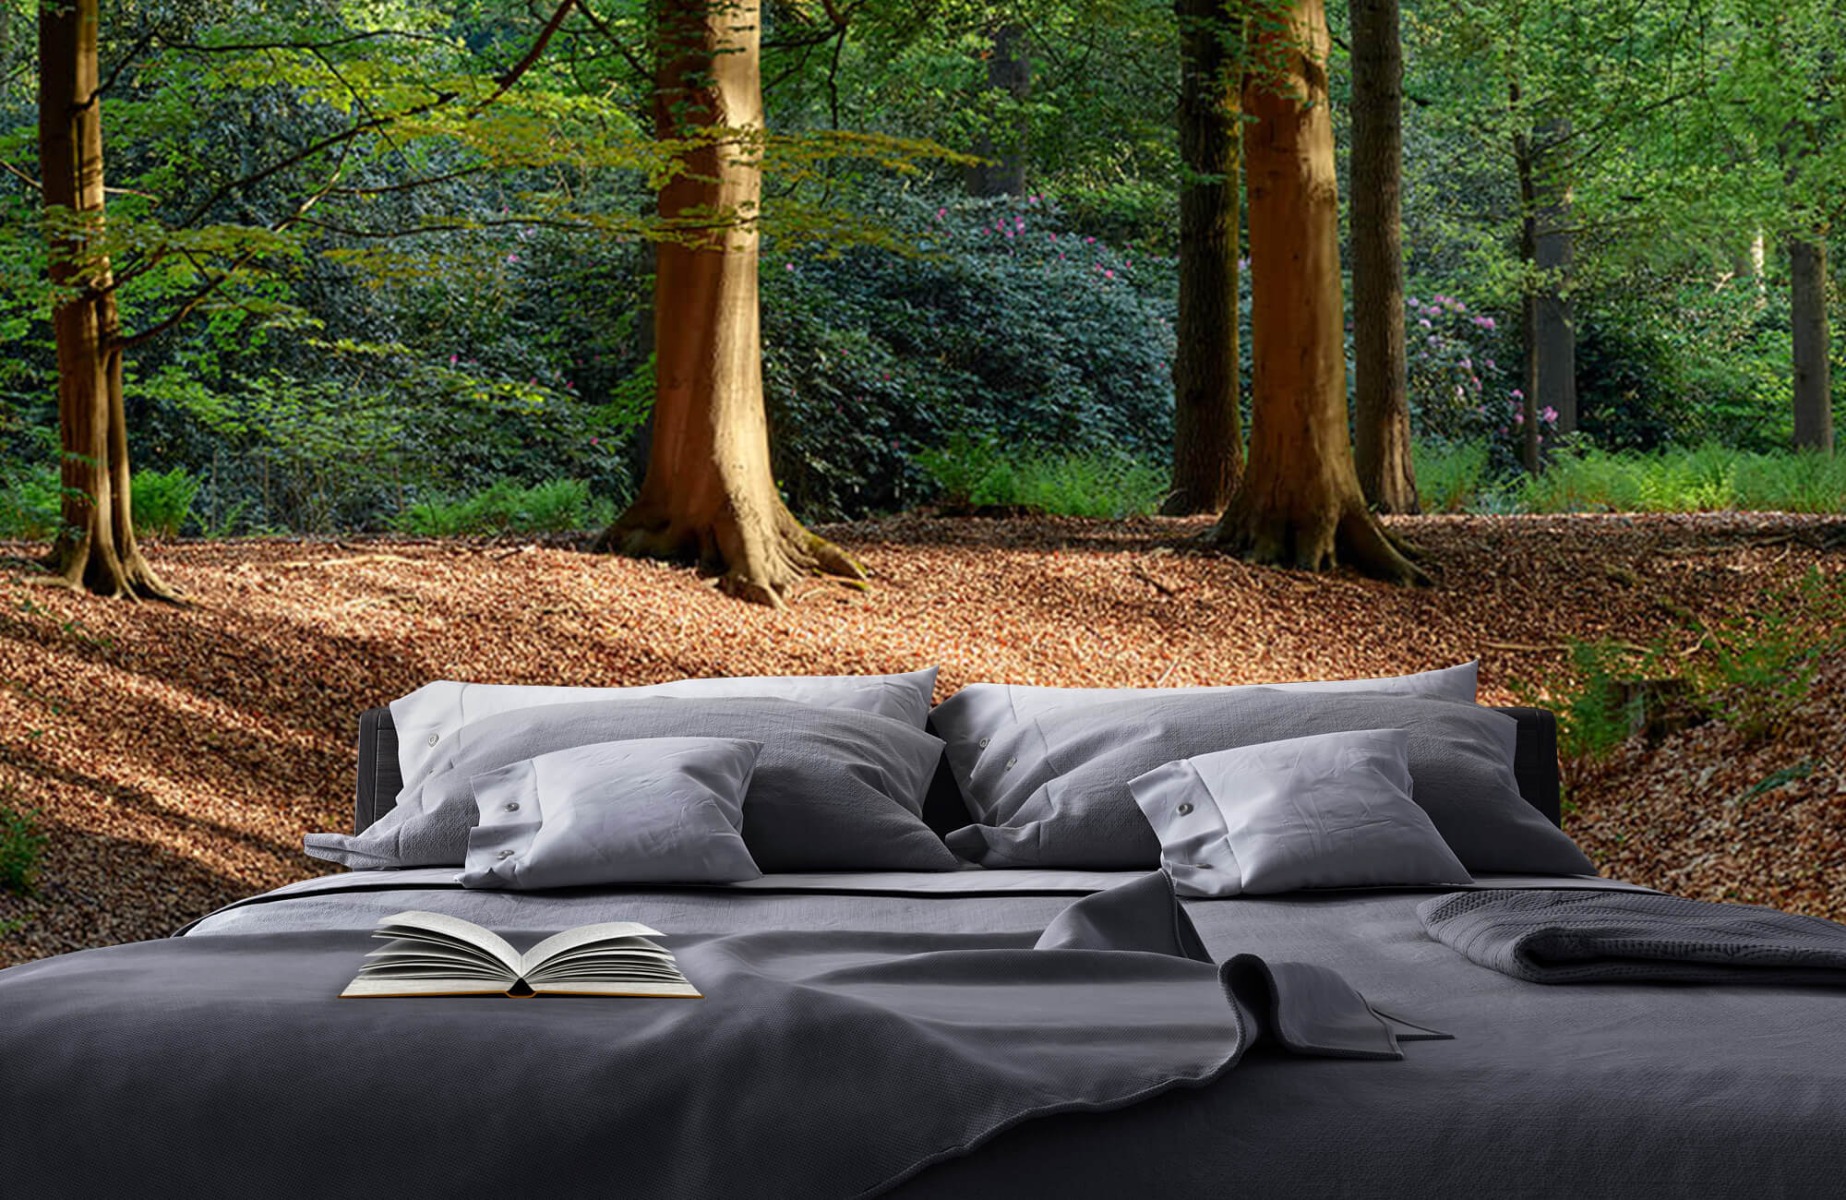 Forest wallpaper - Brooklet in the forest  - Bedroom 17